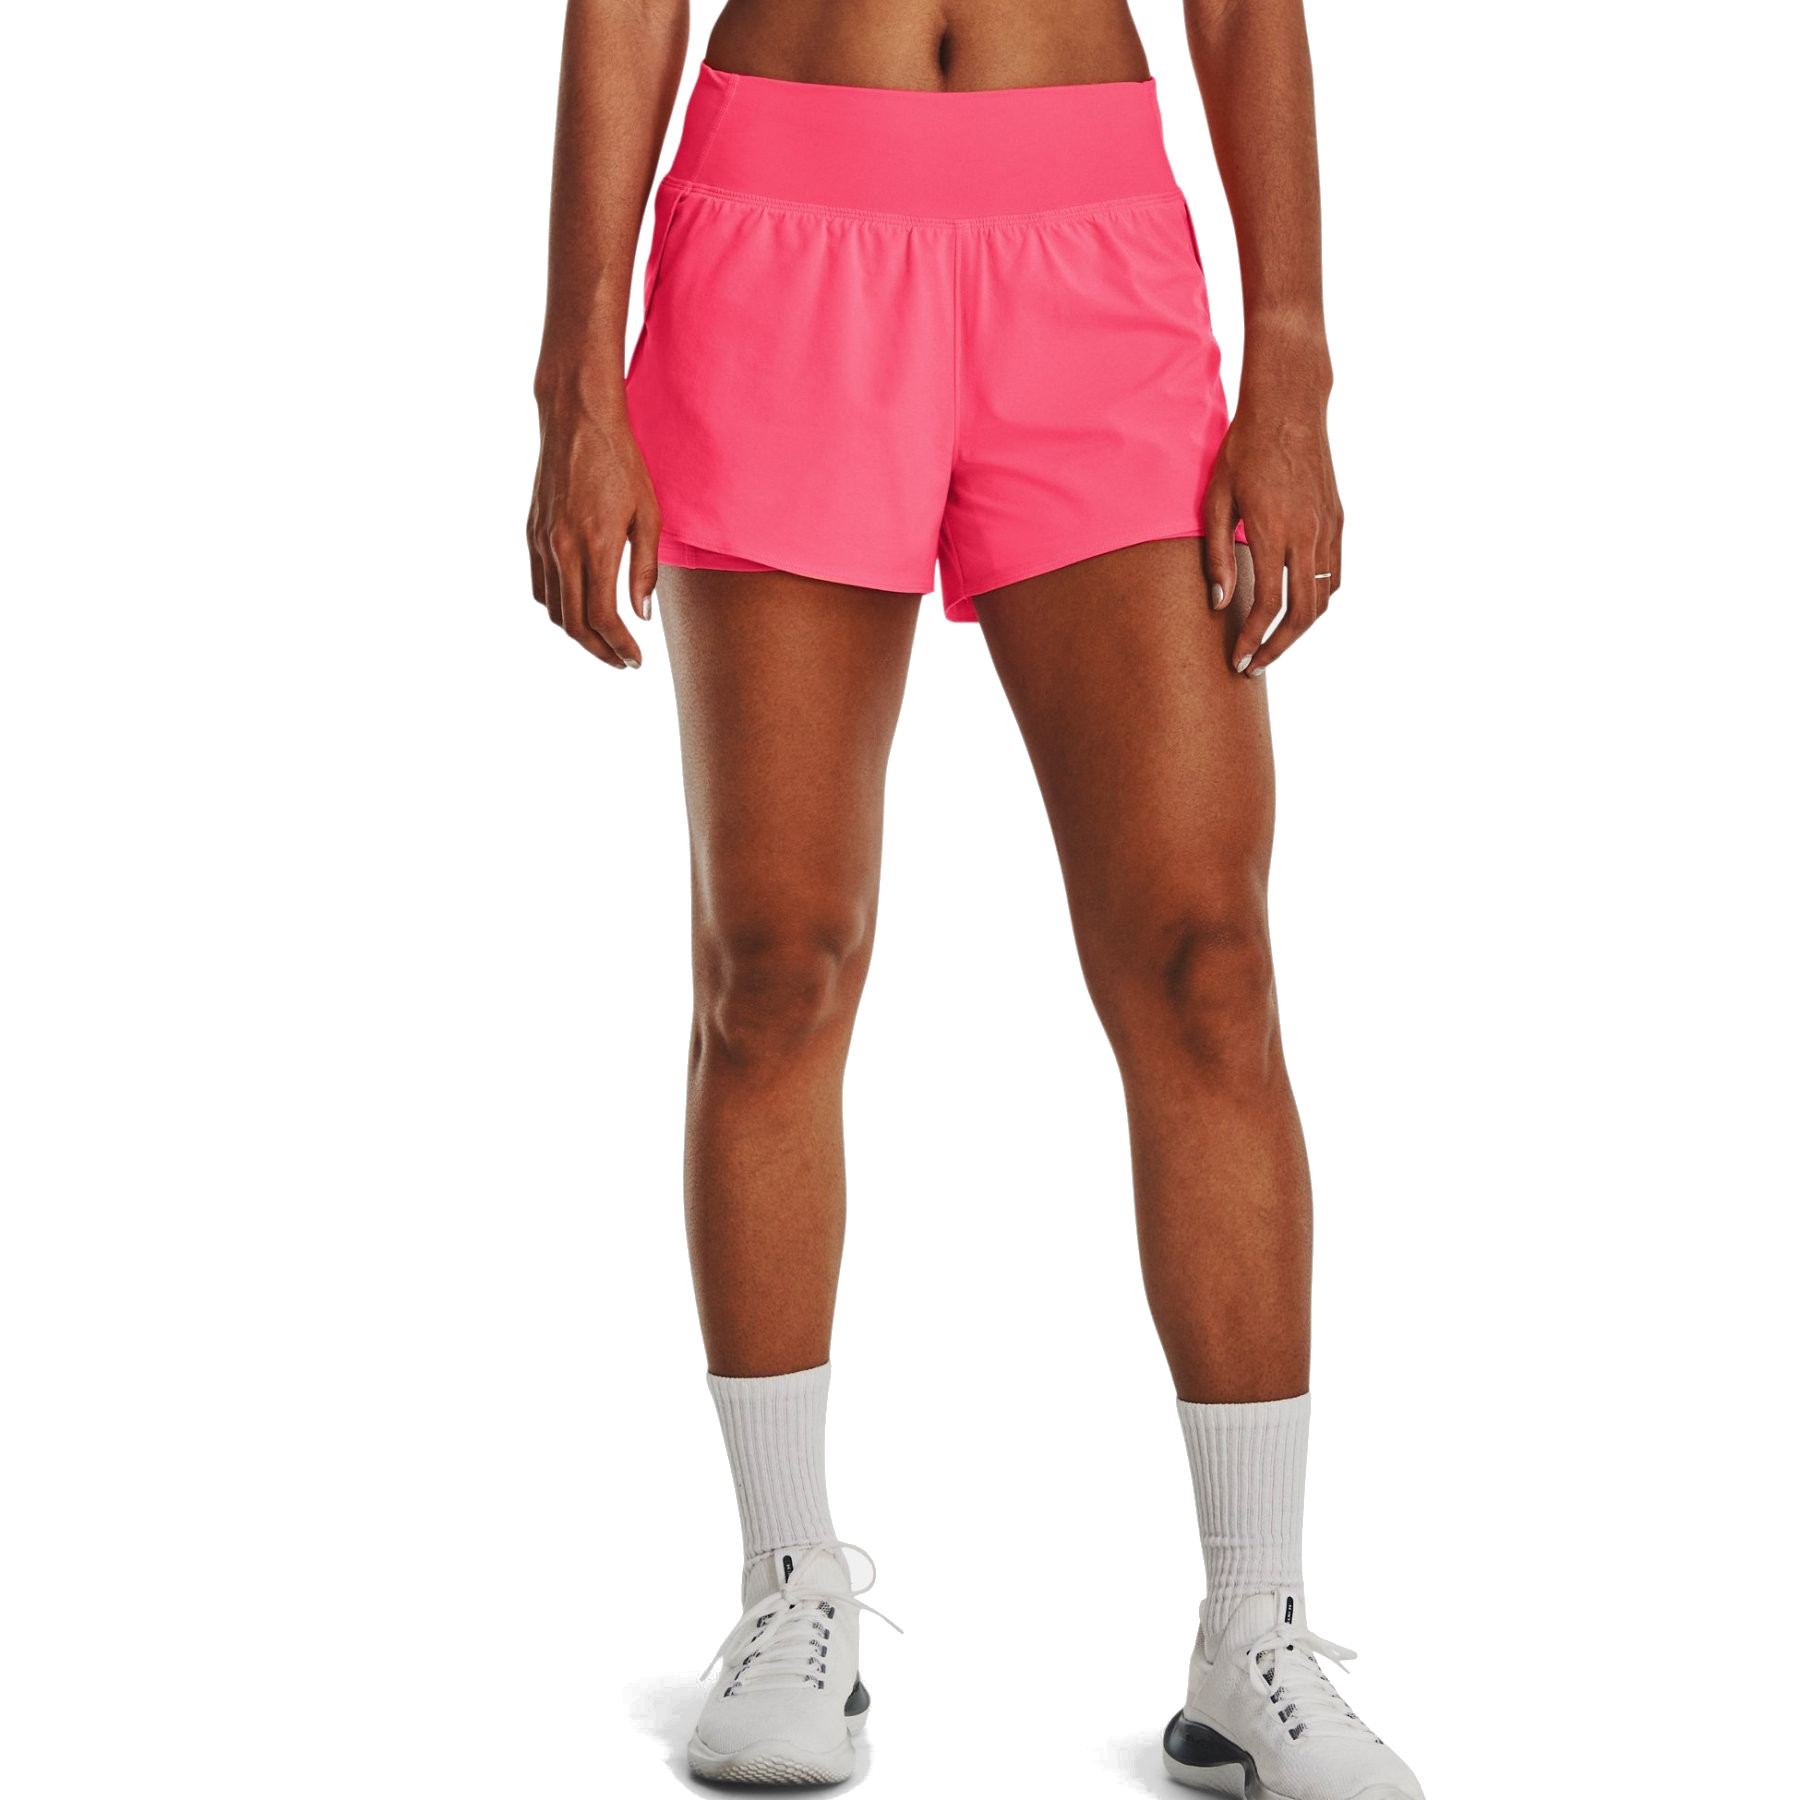 Immagine di Under Armour Shorts Donna - UA Flex Woven 2-in-1 - Pink Shock/Pink Shock